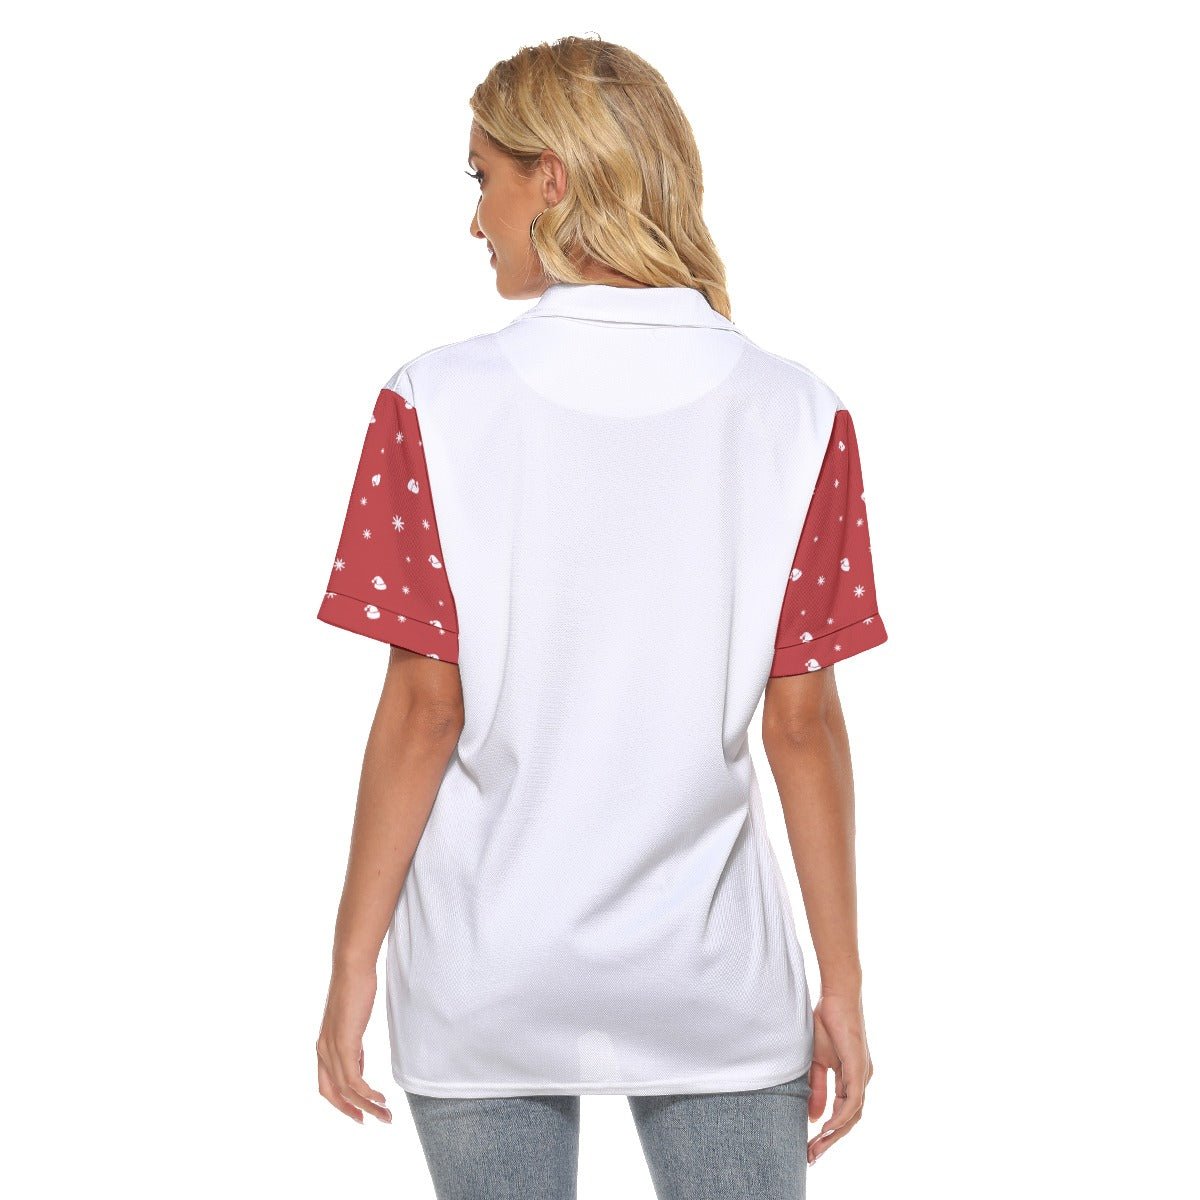 Women's Christmas Polo T-Shirt - Merry Christmas - Red Sleeves - Festive Style